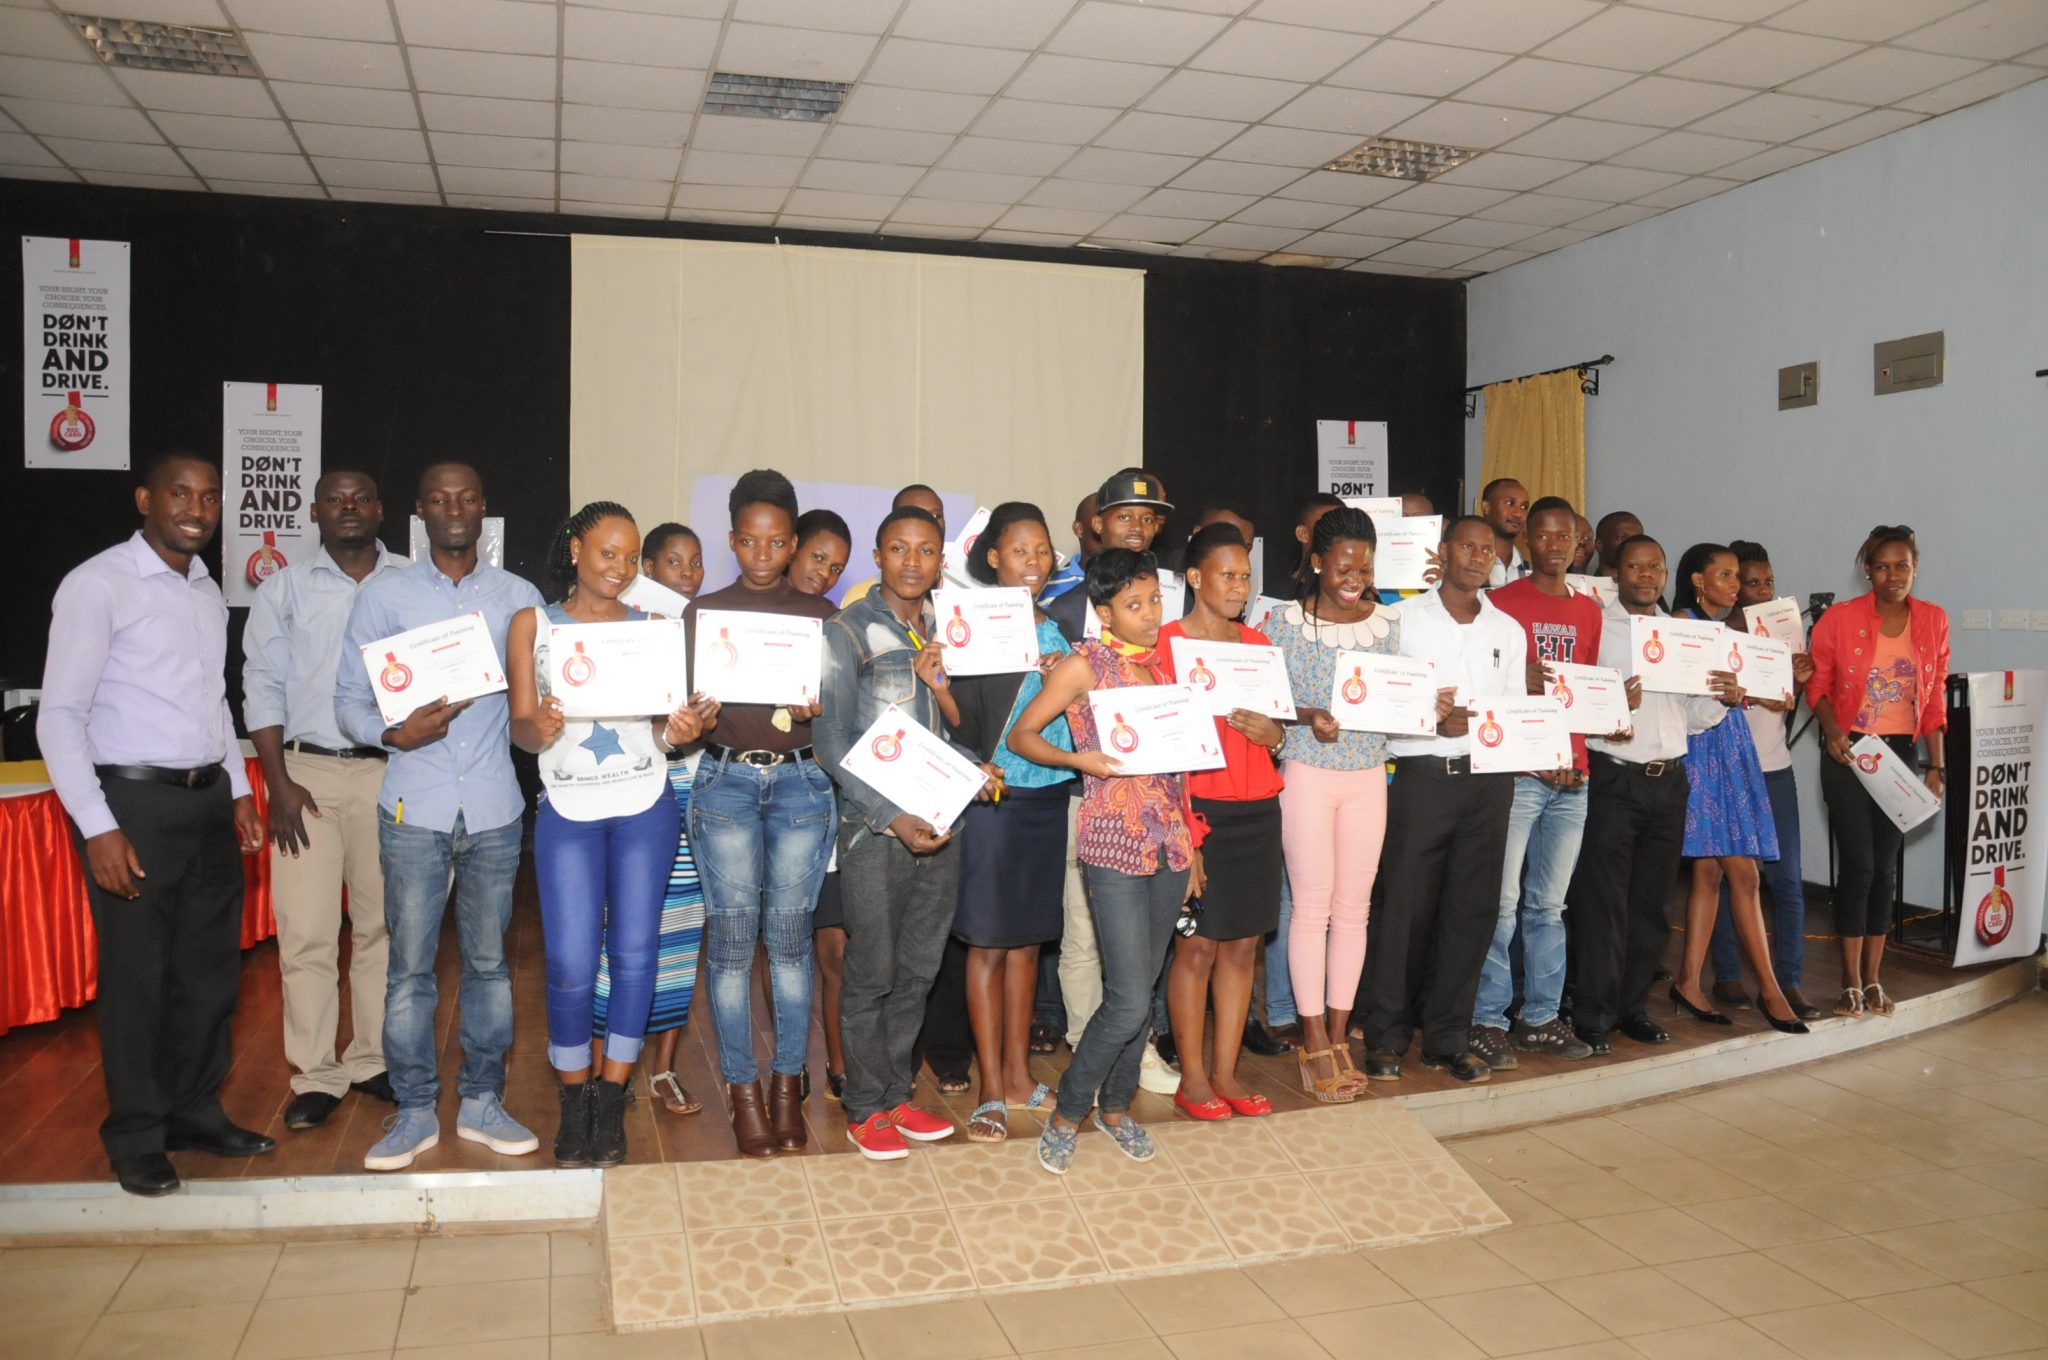 The bar tenders who completed the training were awarded with certificates